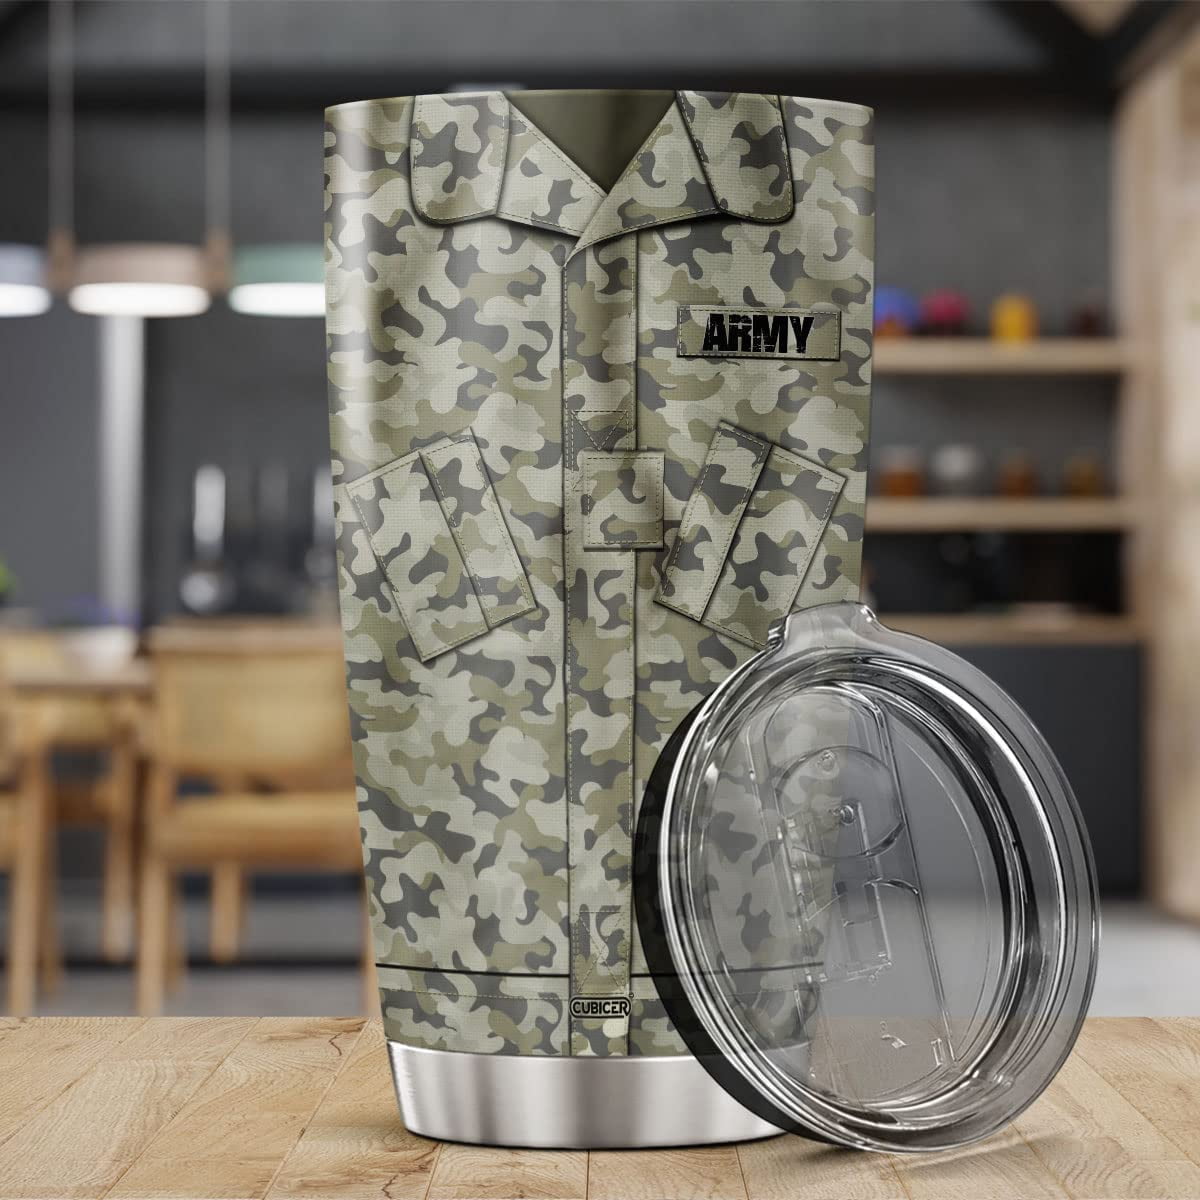 Frigate Army Mugs for Men Veterans Coffee Travel Mug May No Veteran Be  Forgotten When They Return Ho…See more Frigate Army Mugs for Men Veterans